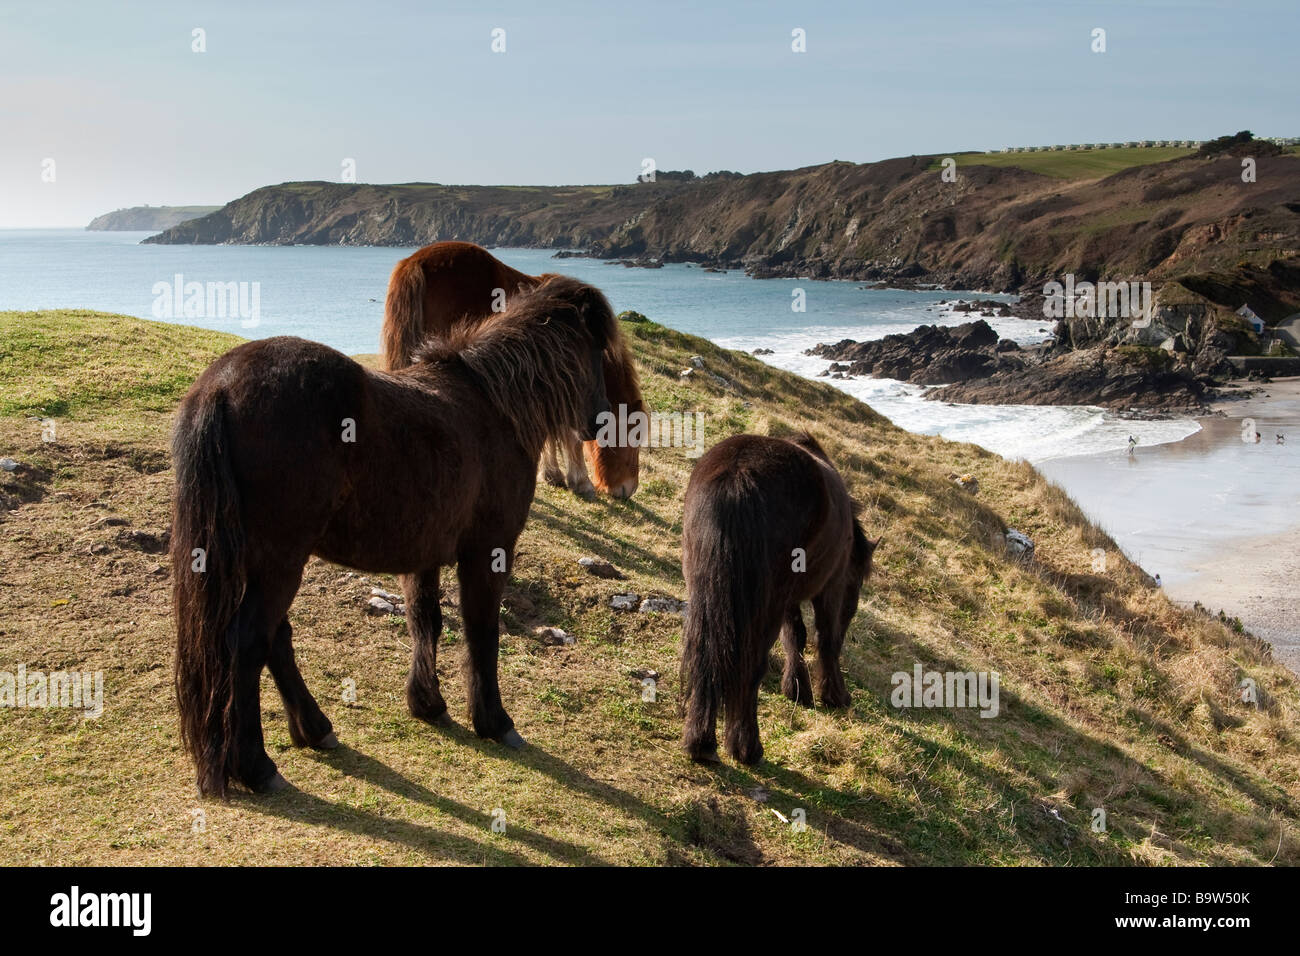 Wild ponies grazing on the cliffs, Cornwall, UK. Stock Photo